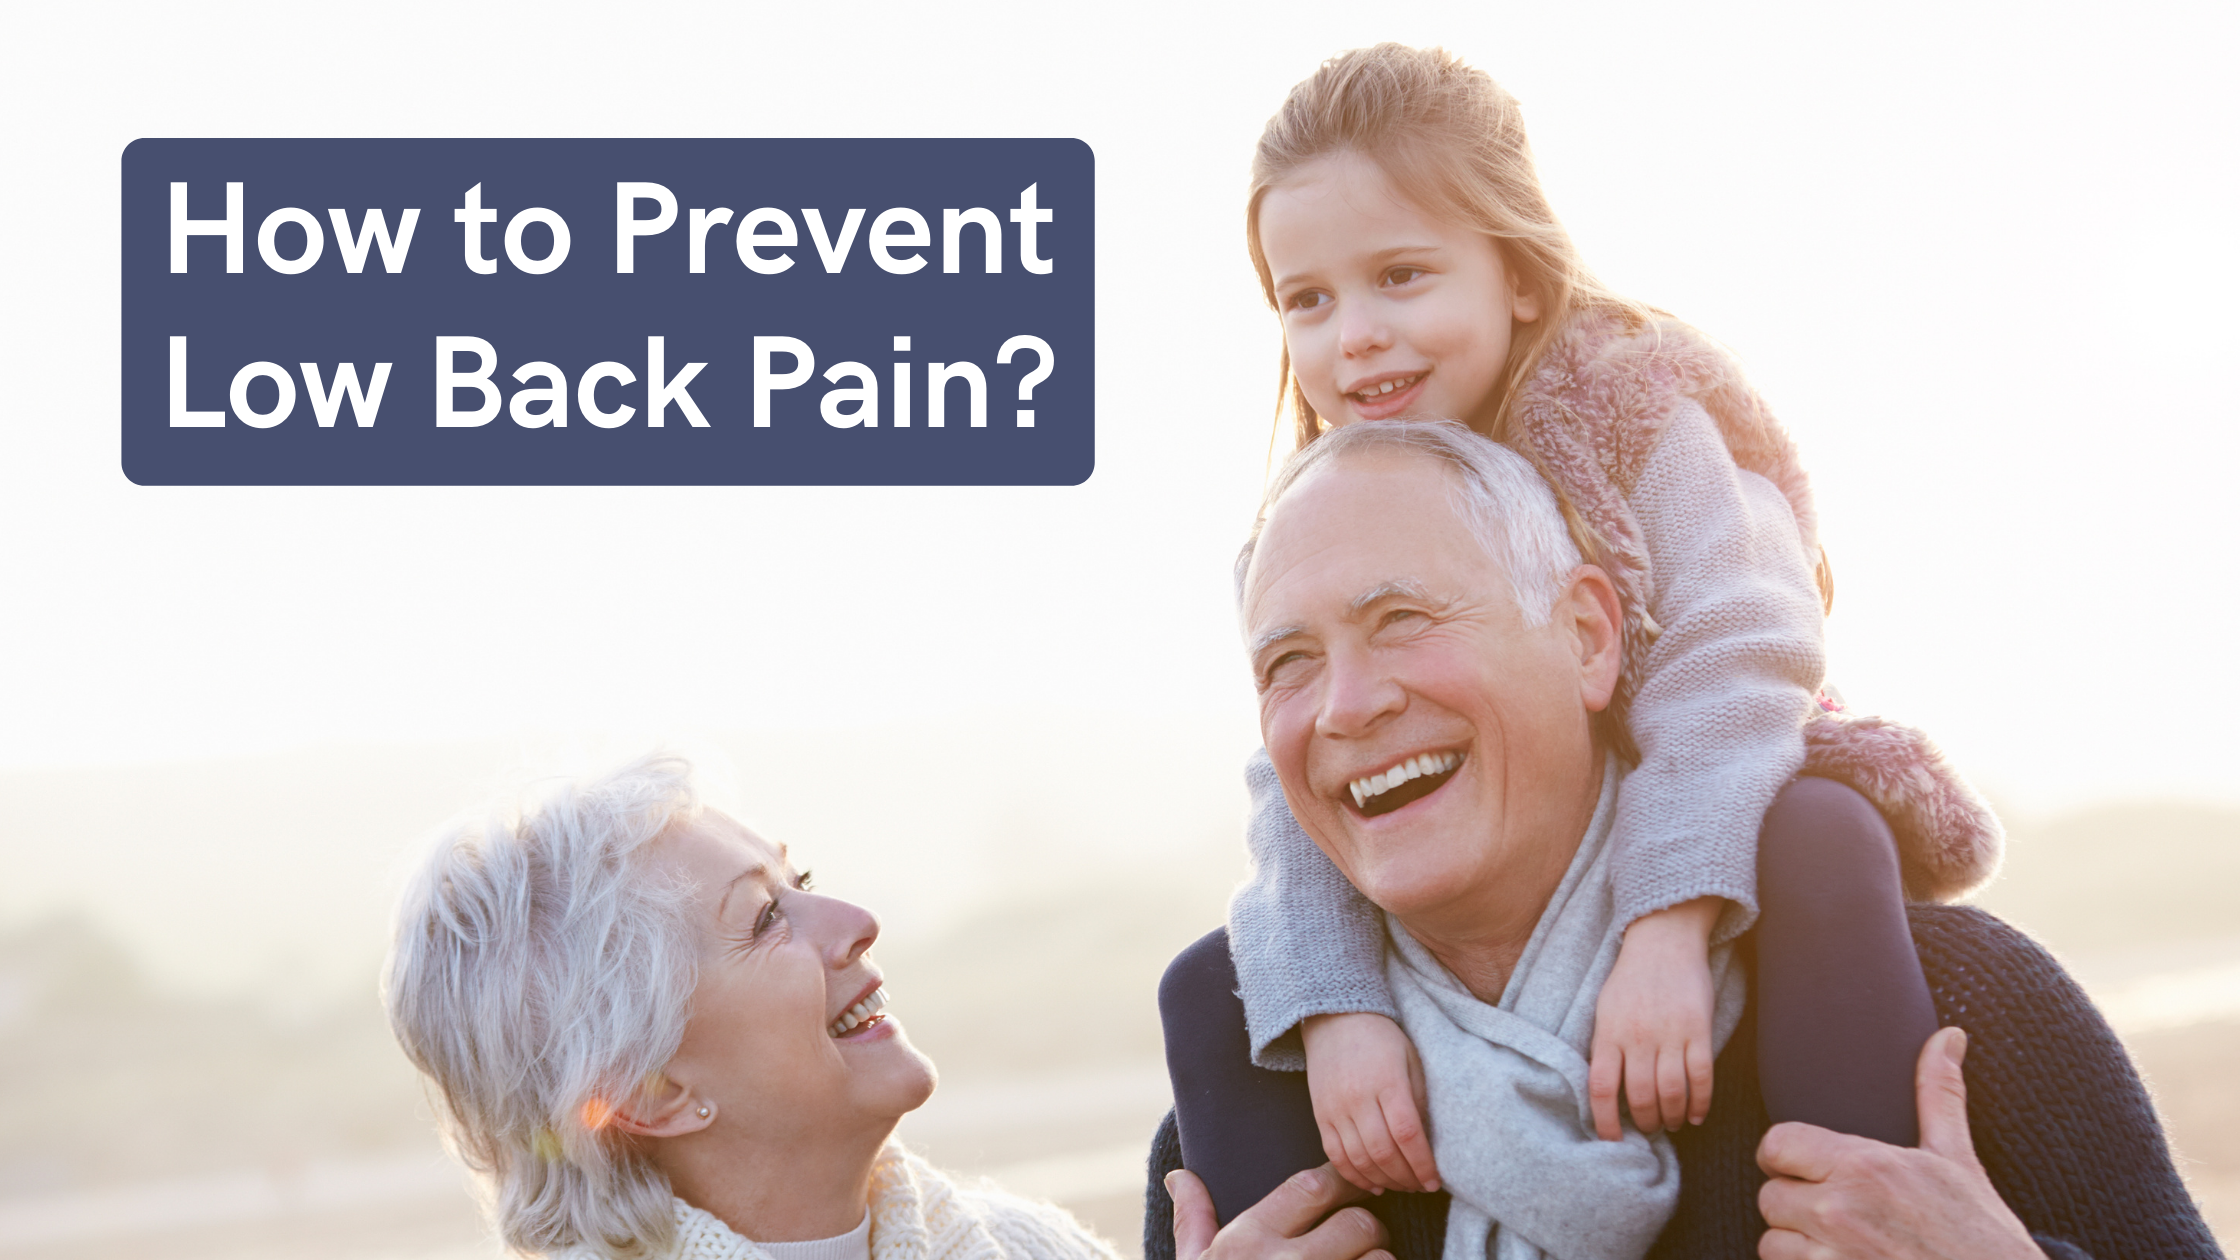 How to prevent low back pain?